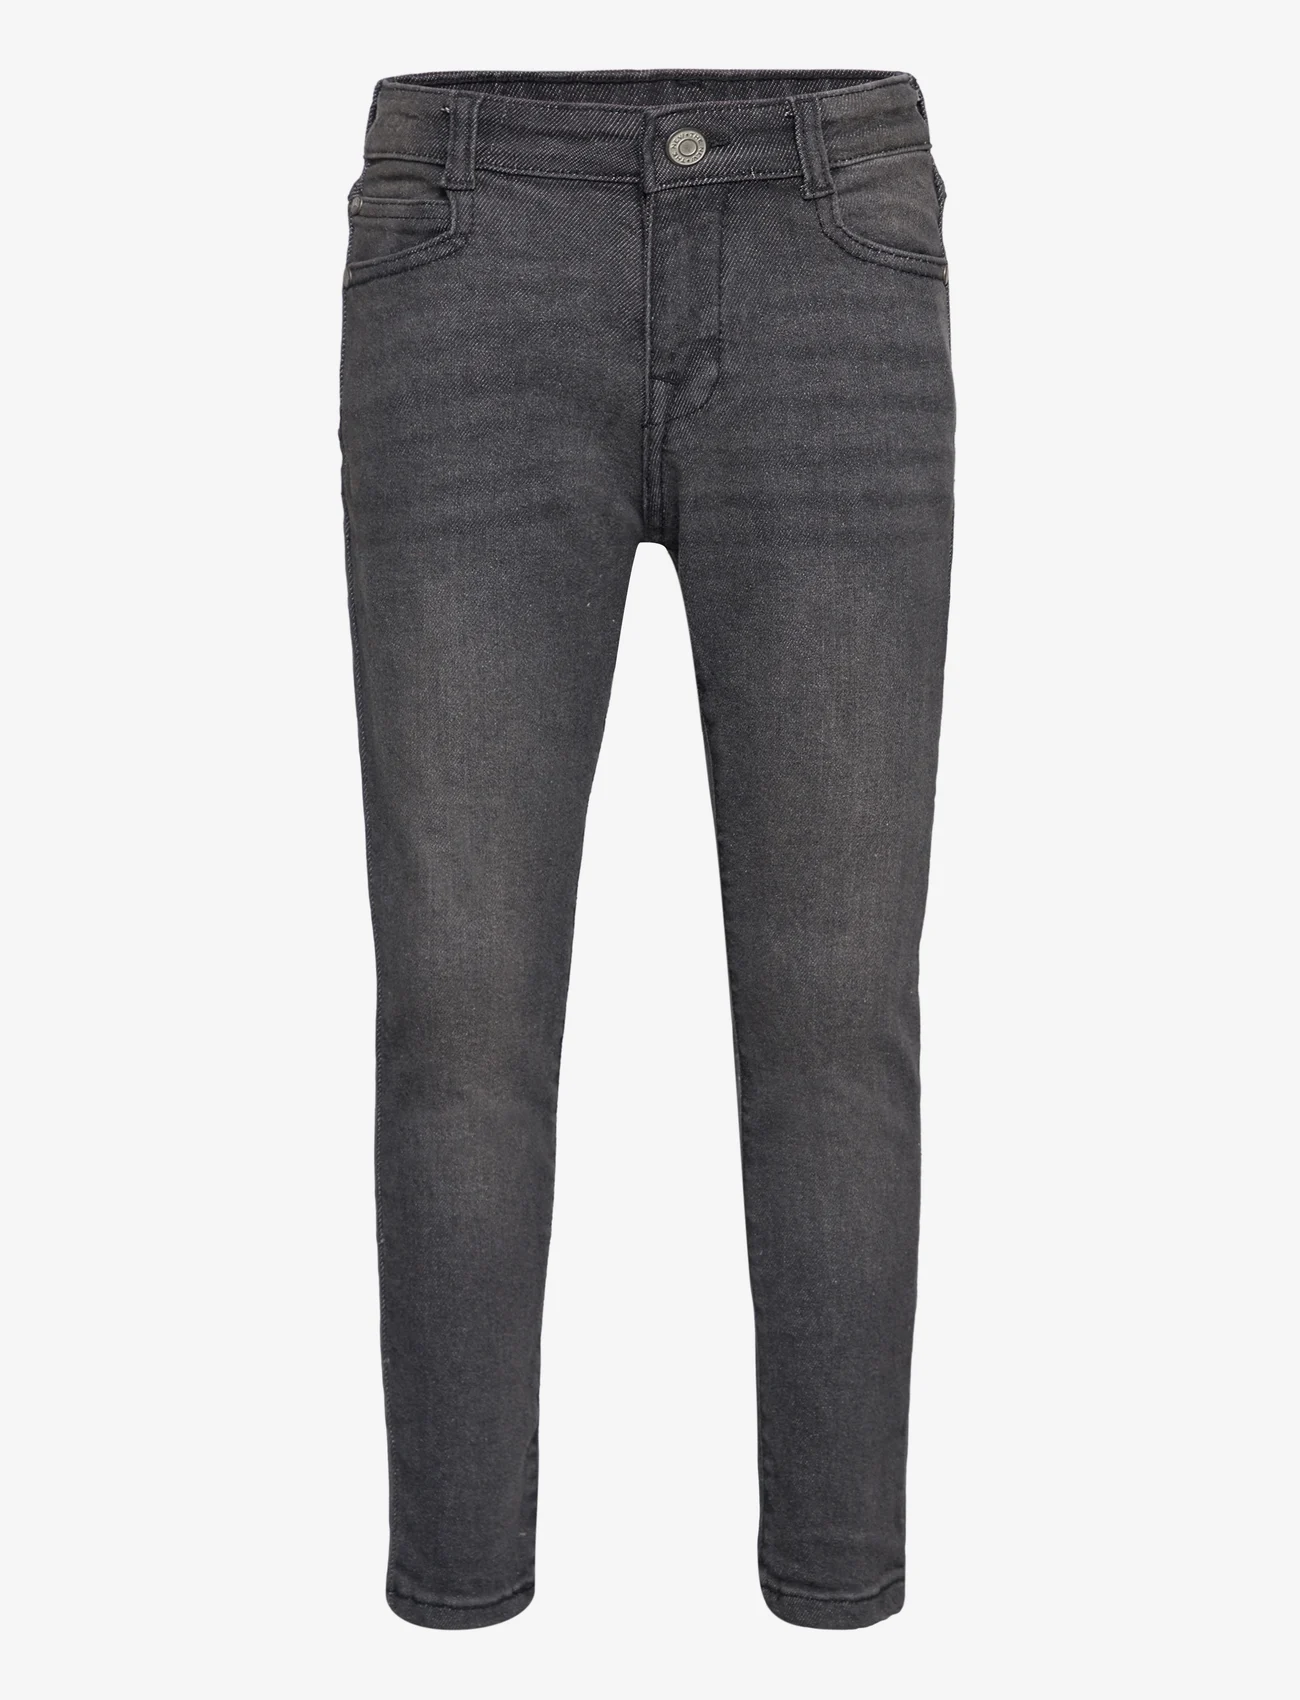 The New - TNALIA MOM FIT JEANS - skinny jeans - washed grey - 0